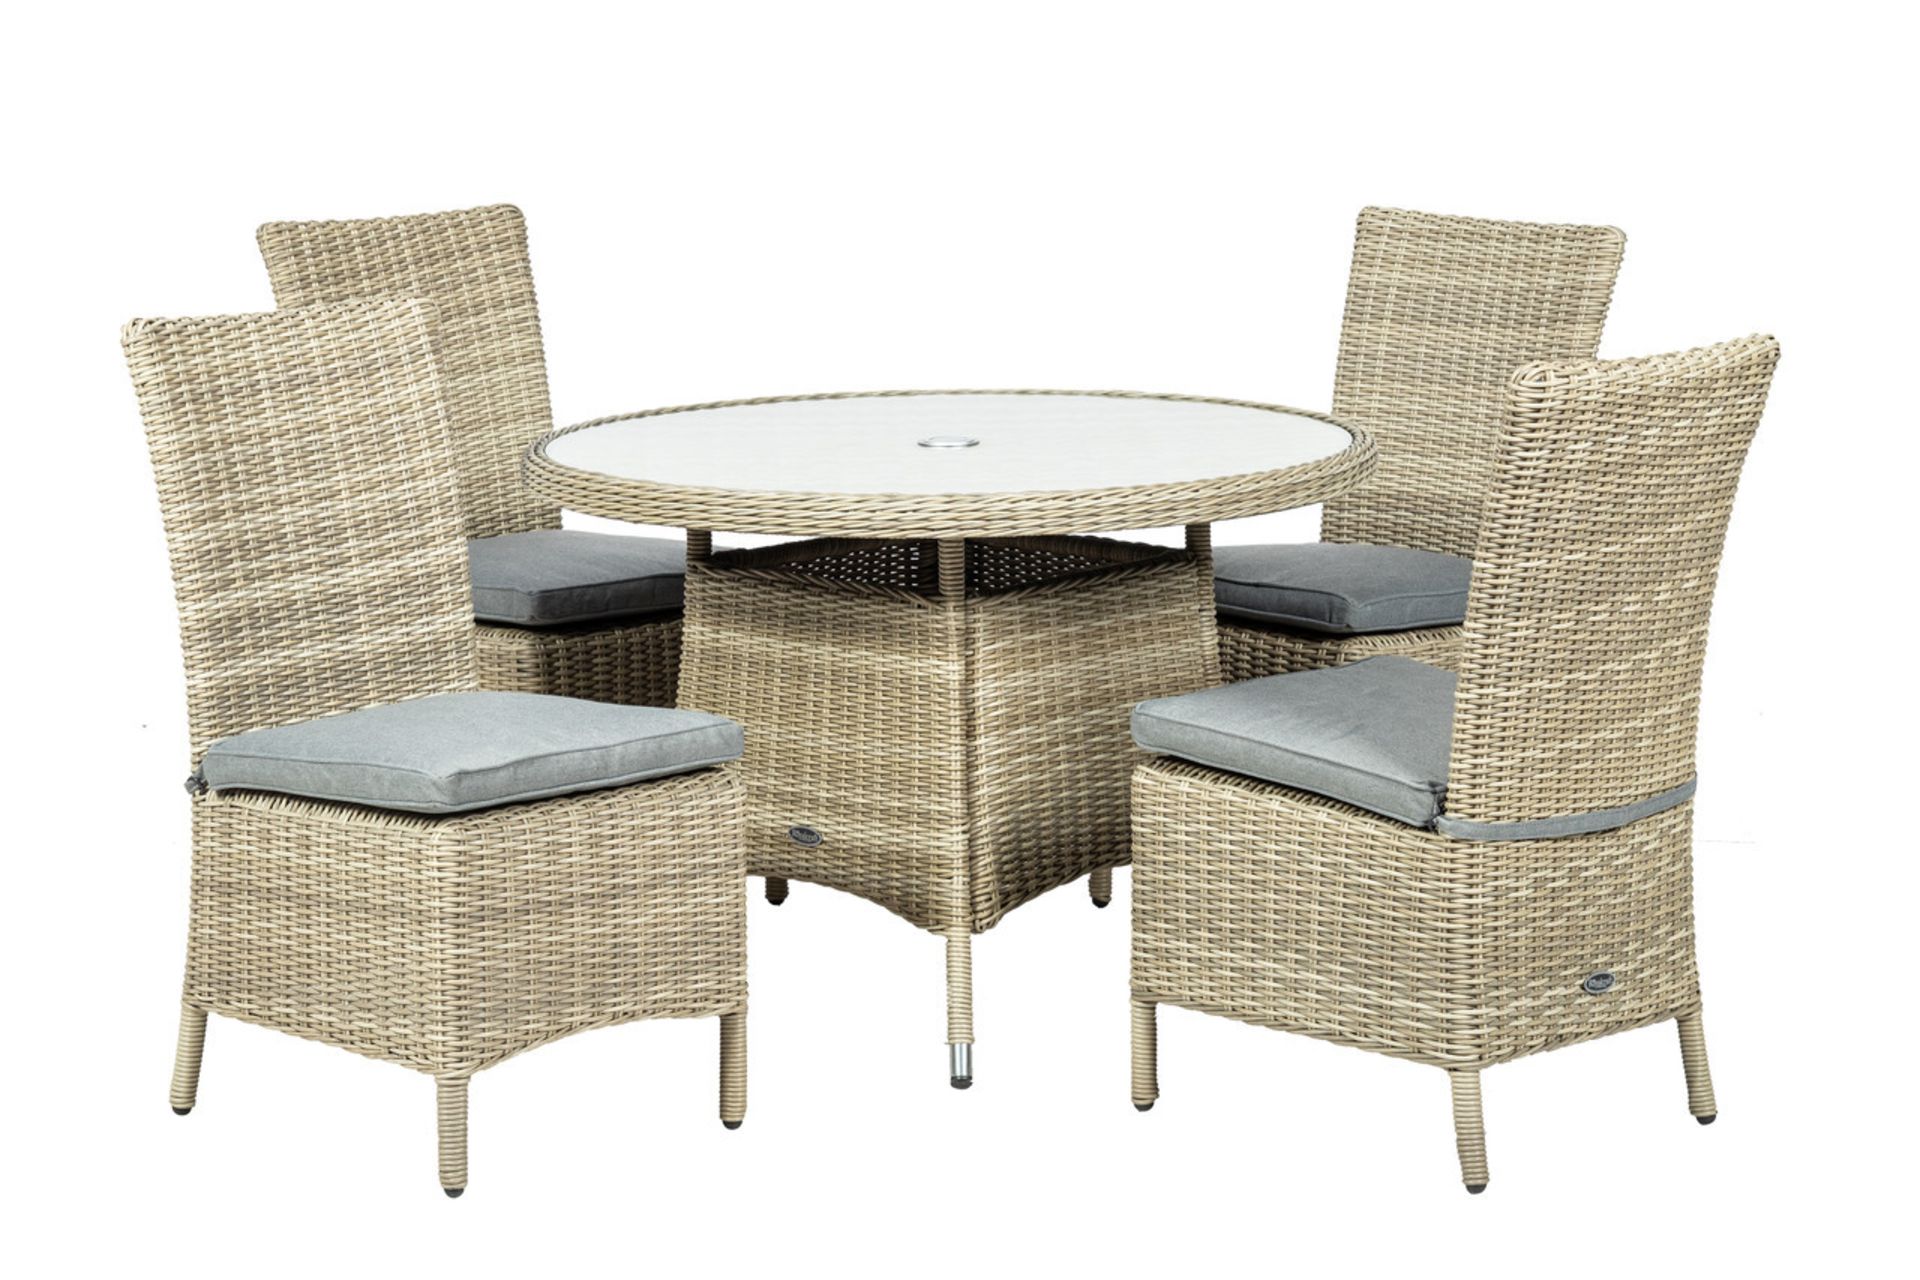 V Brand New TO Wentworth 110 Table With Four Side Dining Chairs - High Quality 5mm Half Round